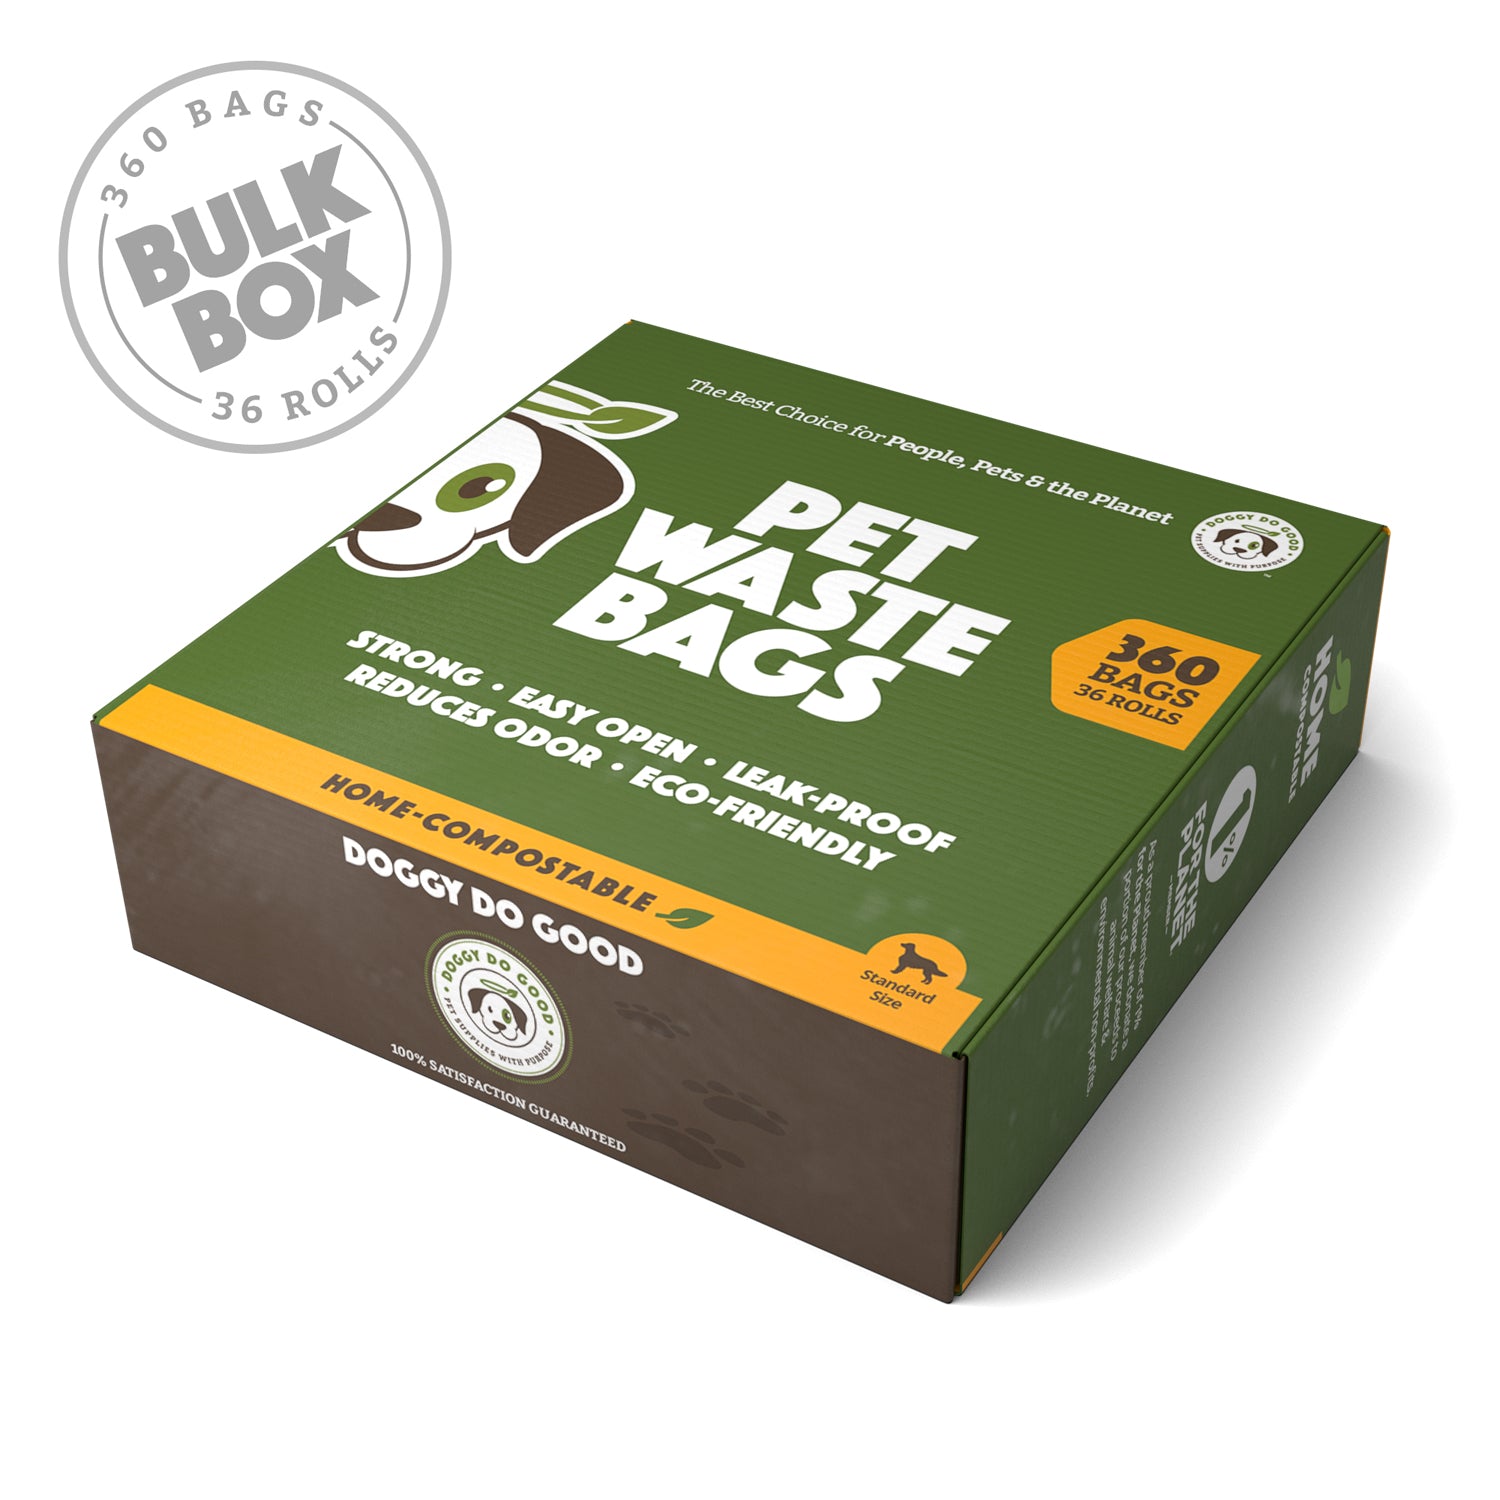 We tried Earth Rated's Certified Compostable Dog Poo Bags, and